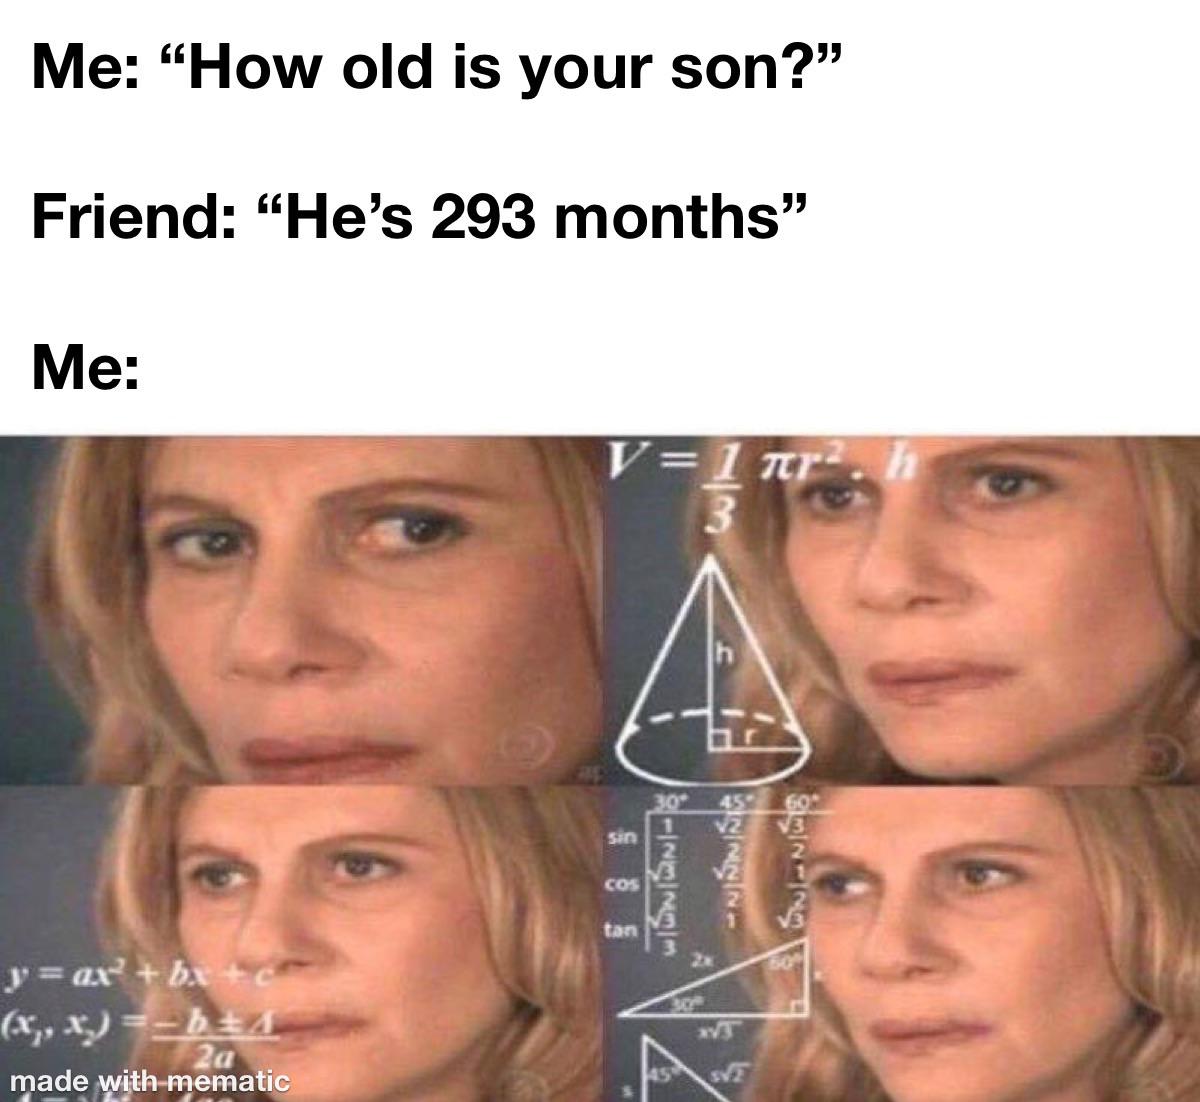 dank memes and pics -  naming things is hard meme - Me "How old is your son?" Friend "He's 293 months" Me yaxbxco x, x b 4 2a made with mematic V1 kr. h 3 sin Cos tan 30 322221 Xvt 45 Sve 60